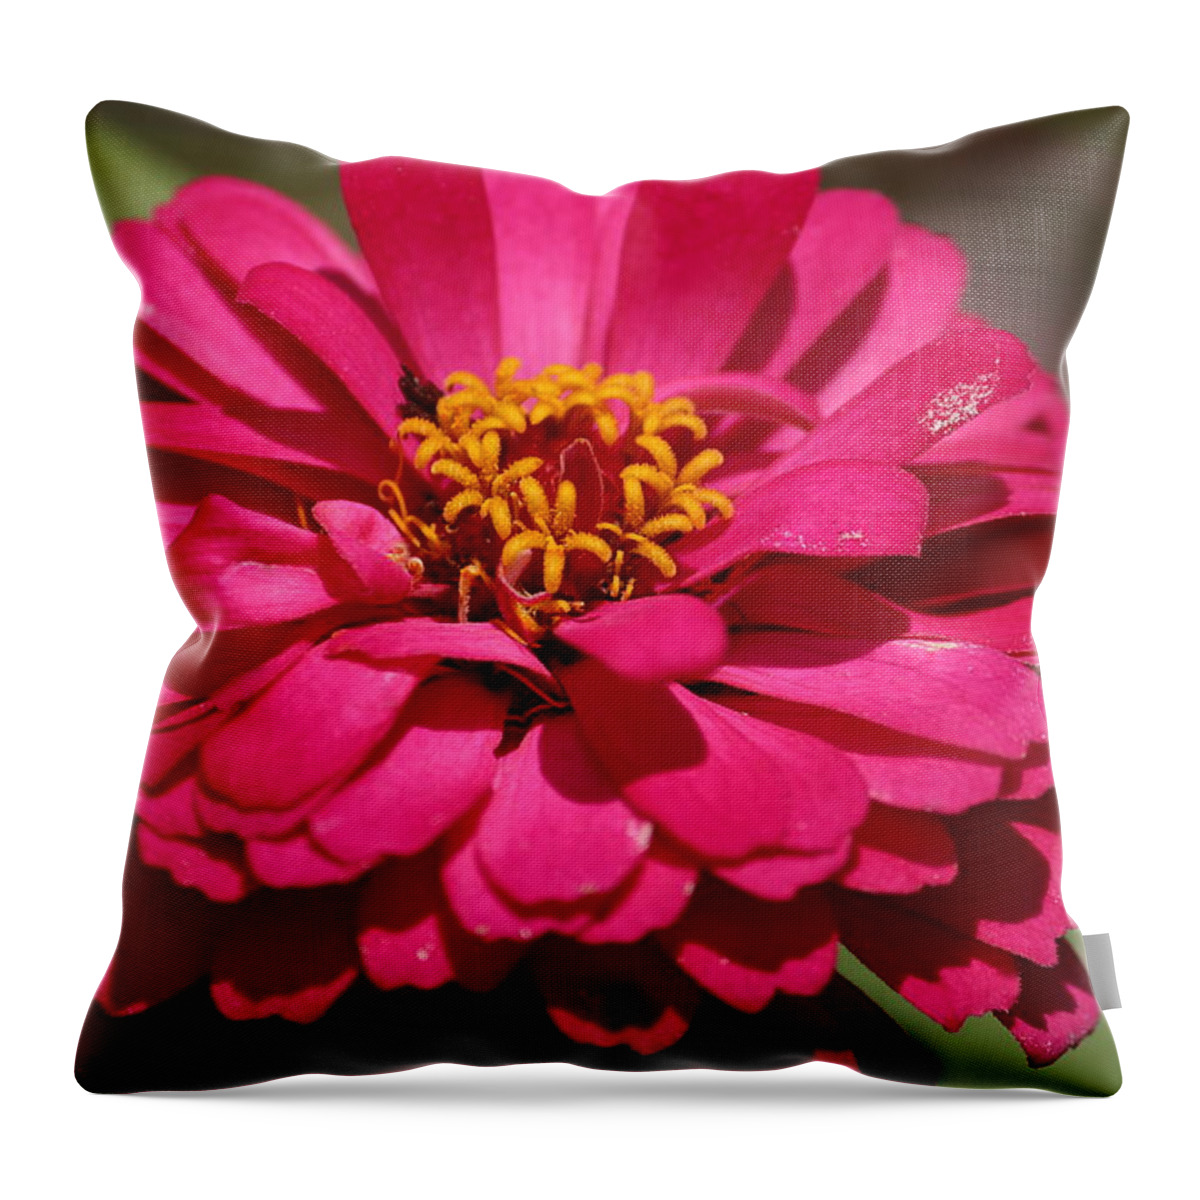 Flower Photographs Throw Pillow featuring the photograph Zinnia by Ester McGuire